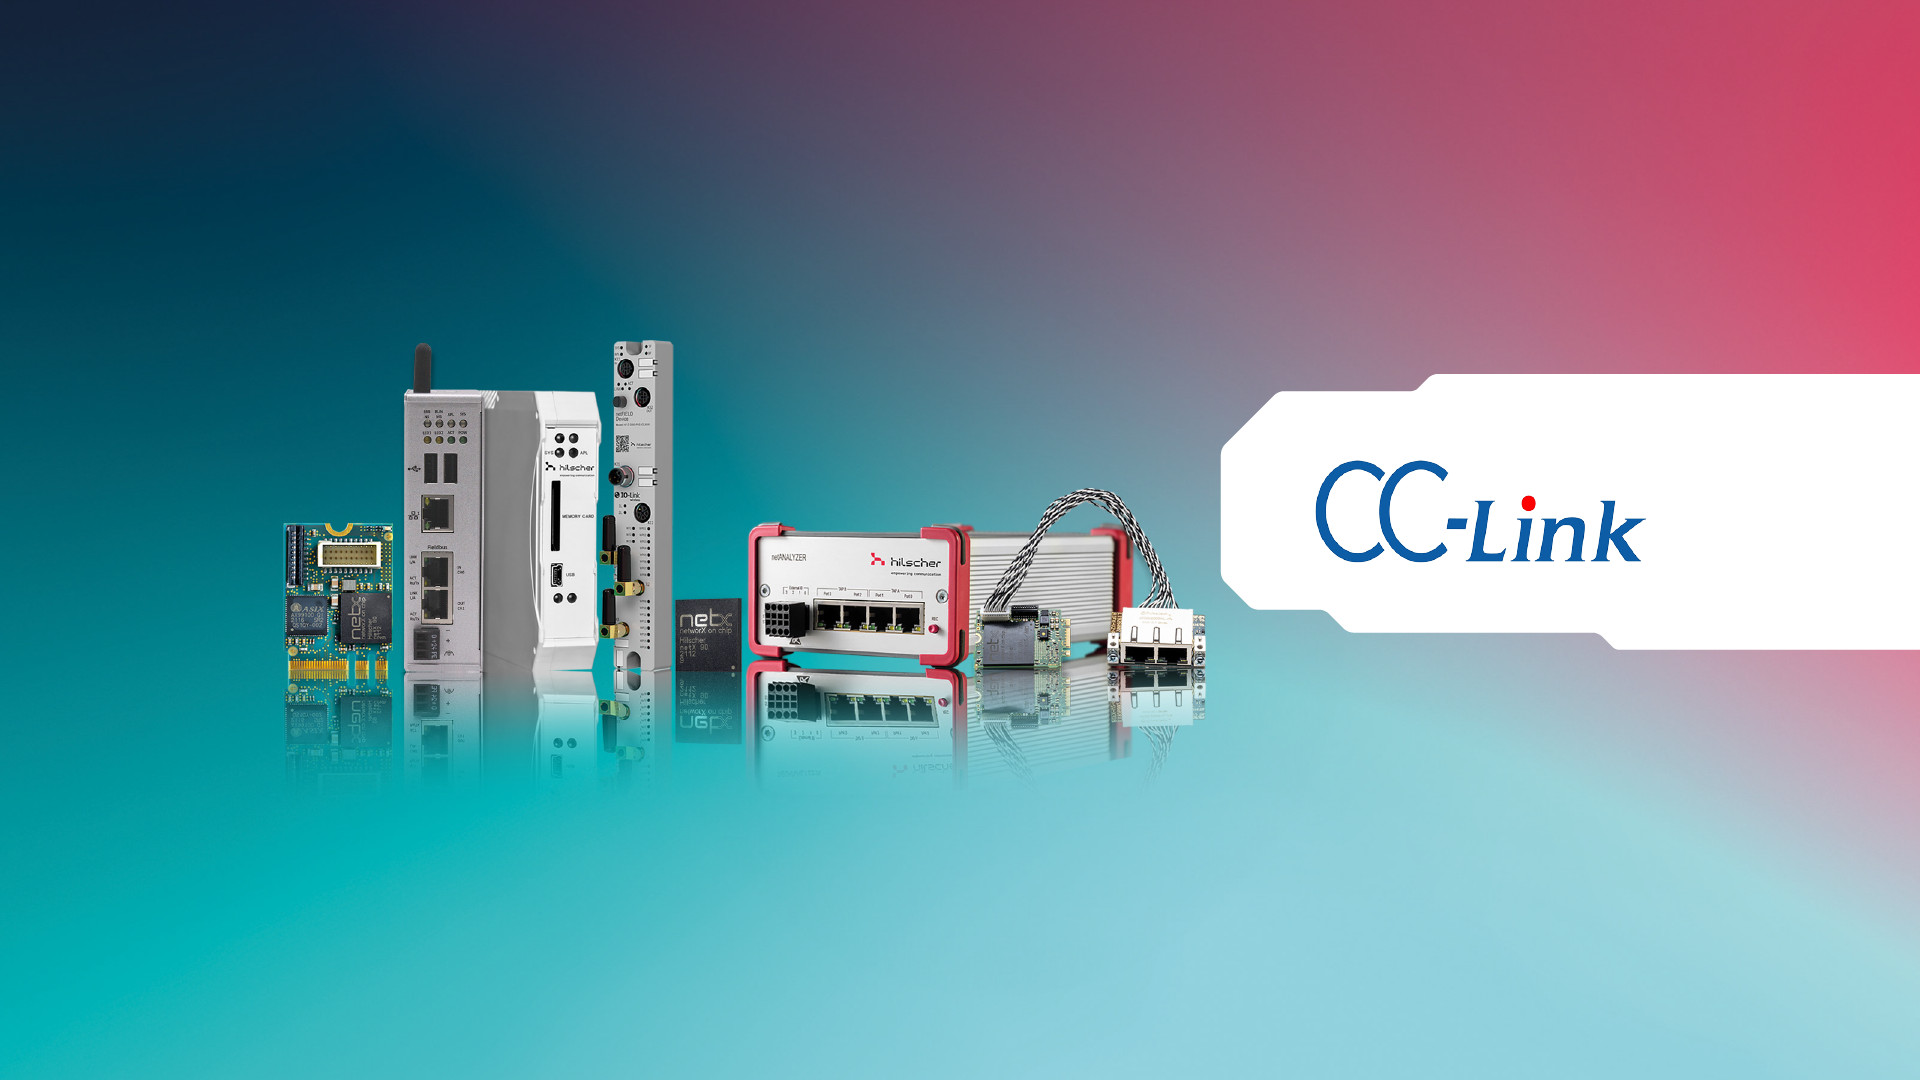 A line of 8 industrial communication products by Hilscher on a blue and red background. On a white area on the right side, there is an CC-Link logo in blue.